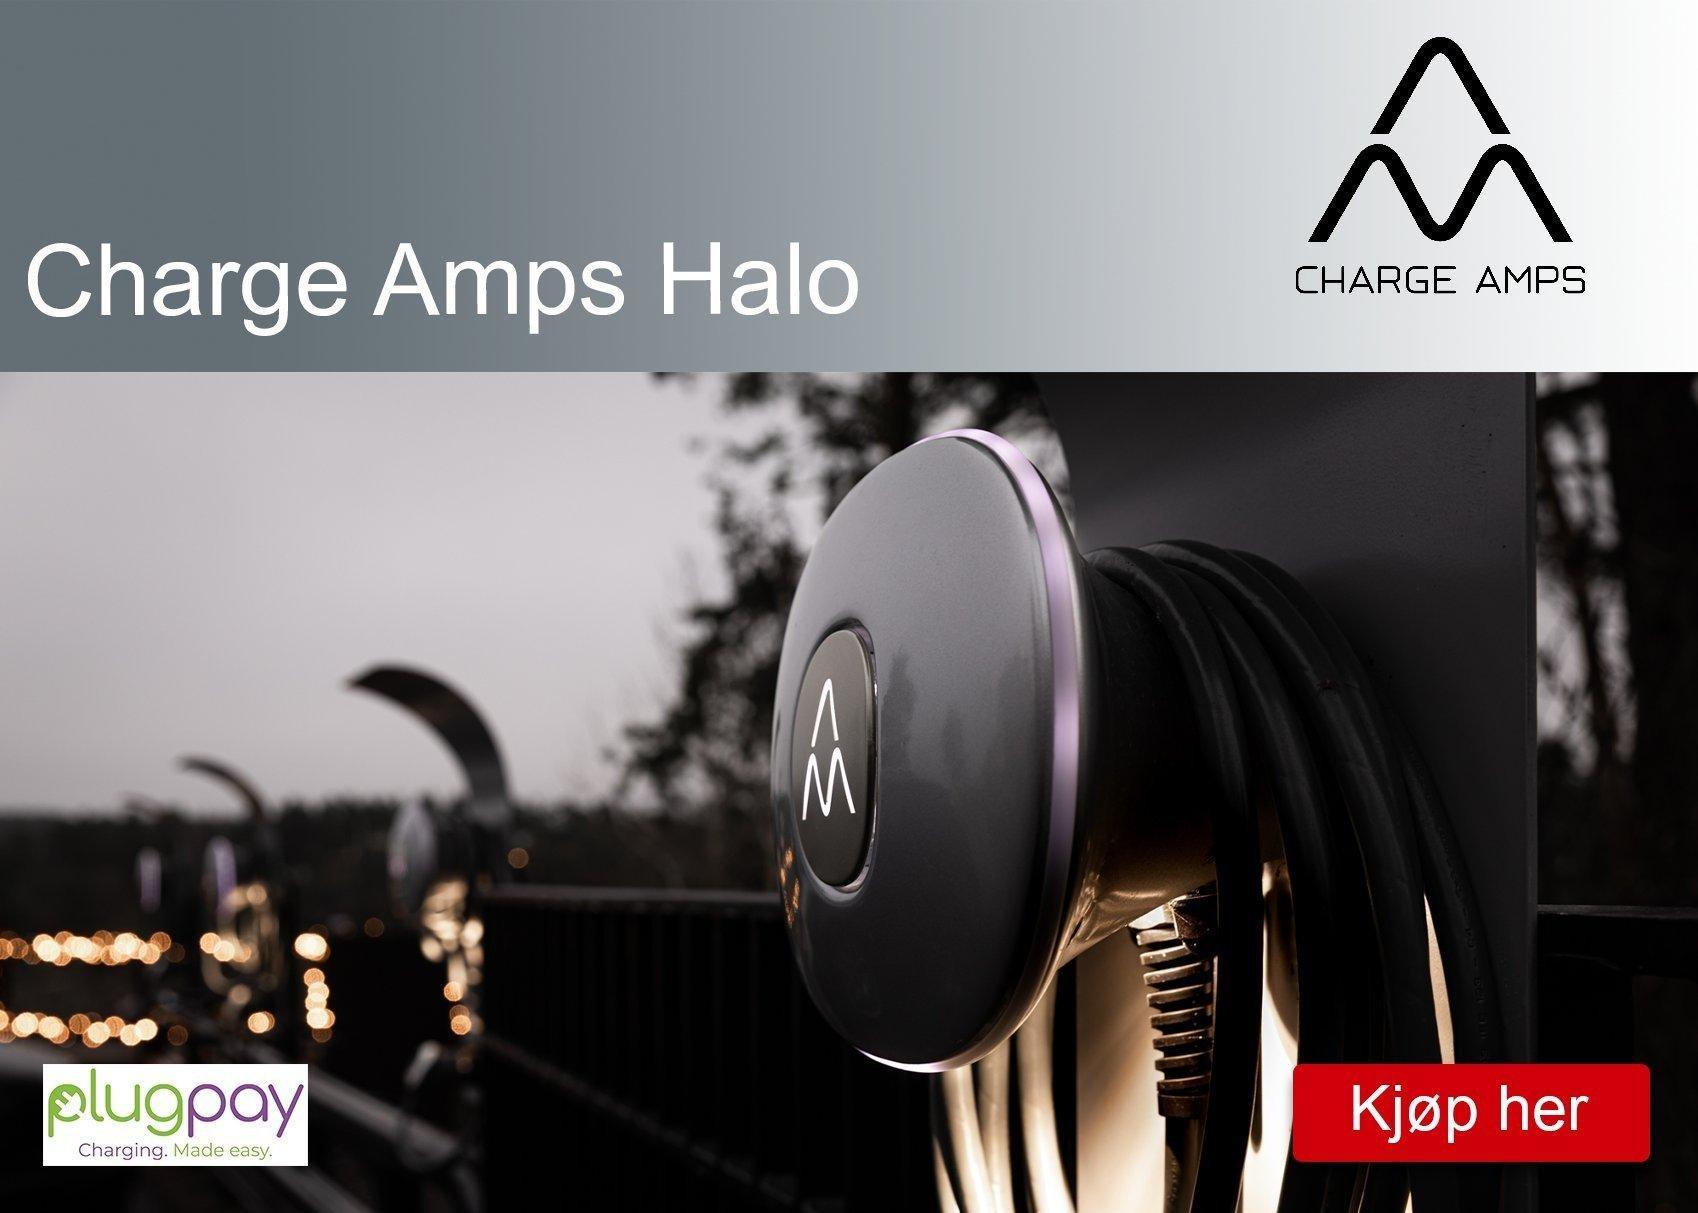 Charge Amps Halo